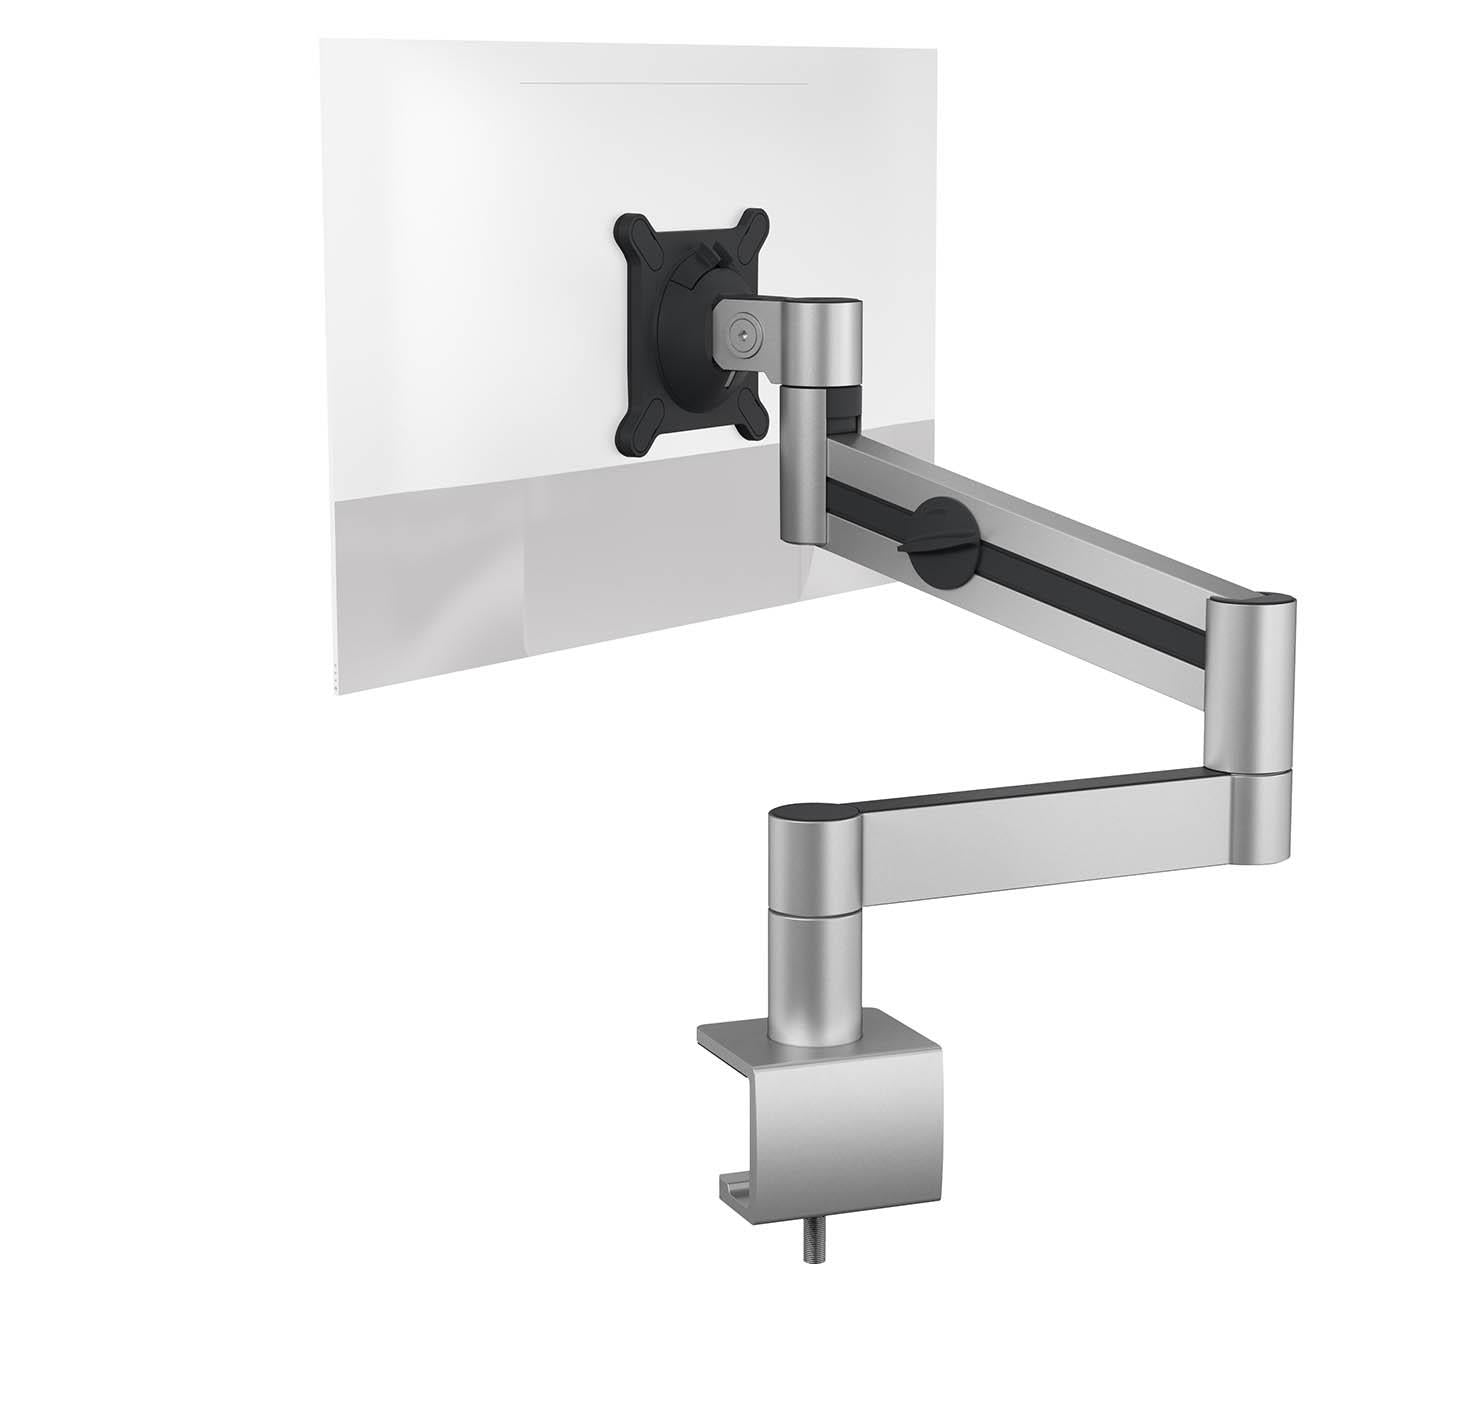 Durable Monitor Mount PRO with Arm for 1 Screen | Desk Clamp Attachment